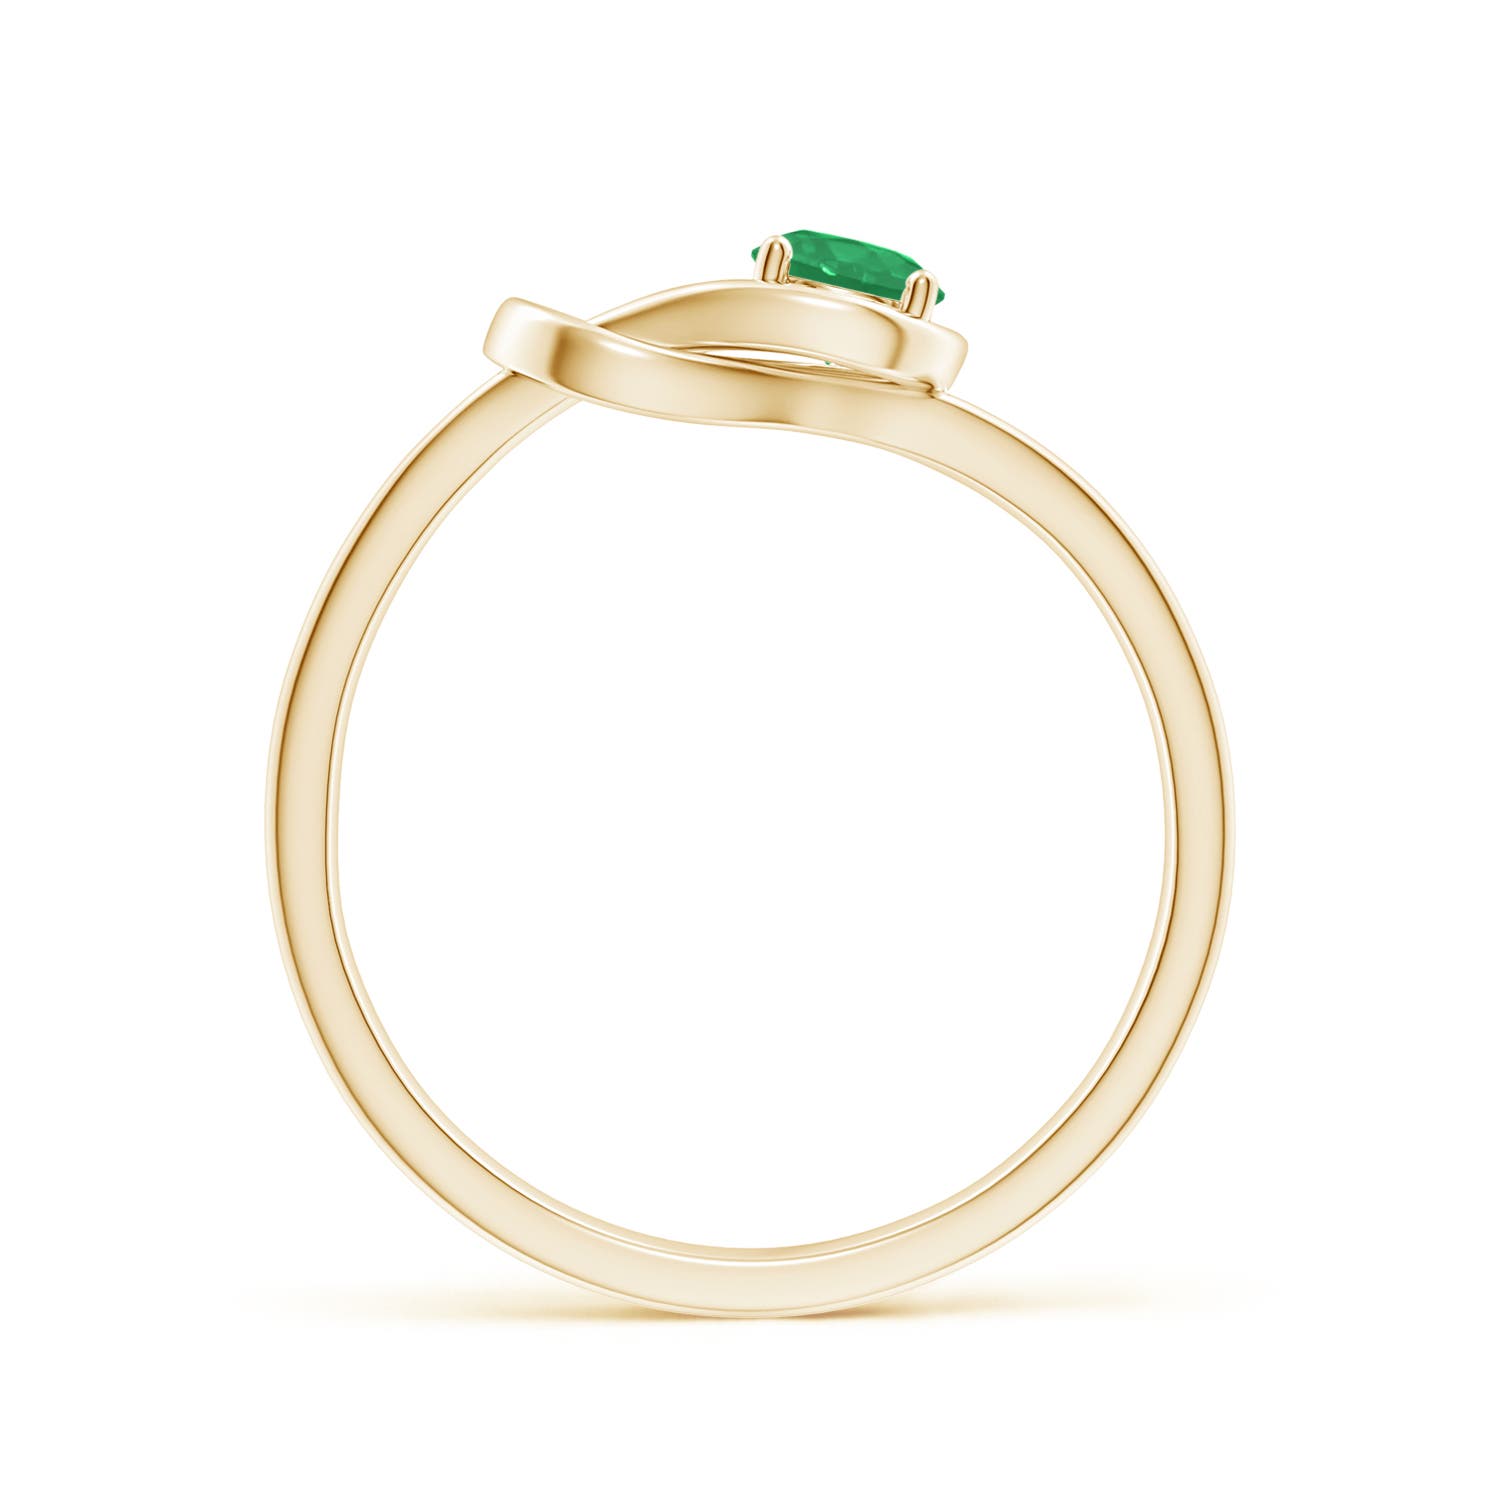 A - Emerald / 0.24 CT / 14 KT Yellow Gold